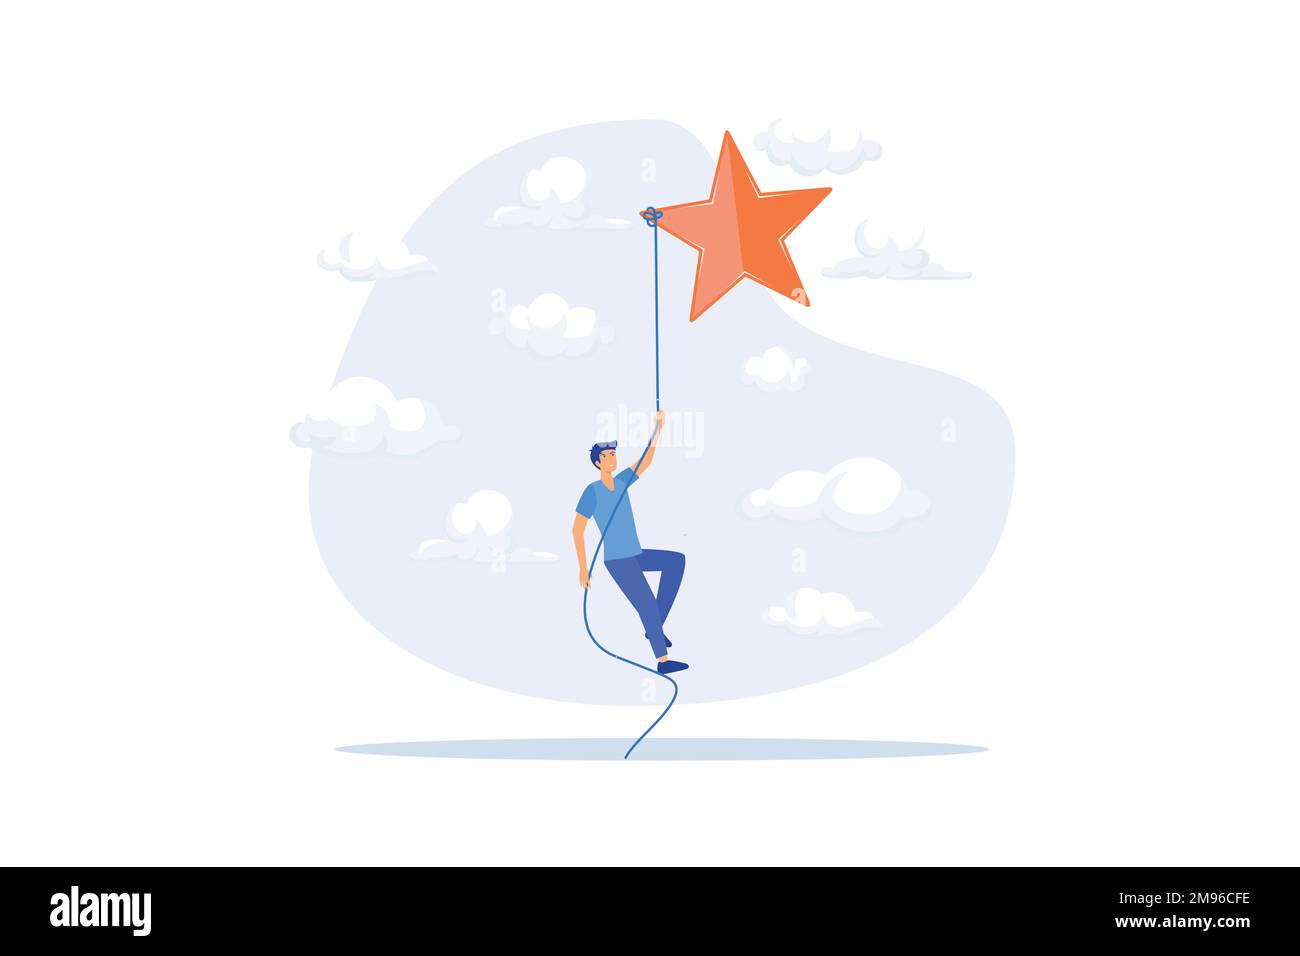 Effort to achieve goal or success, courage or risk taking to win business or career growth, reaching goal or finish mission concept, flat vector moder Stock Vector